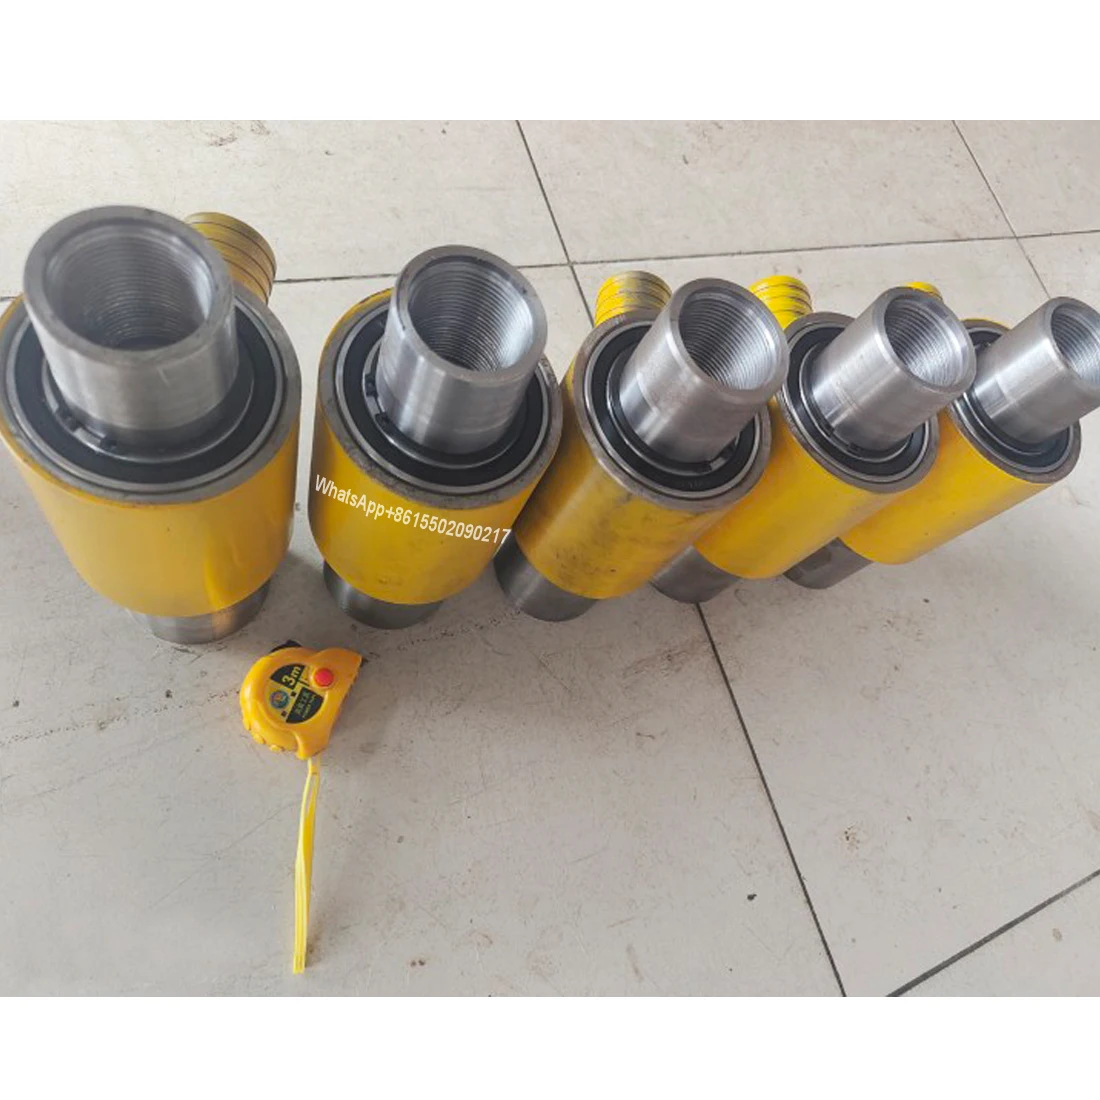 Drill pipe drilling well and passing pipelayer/Drilling machine water drill water injector/water filling device pressurized flow